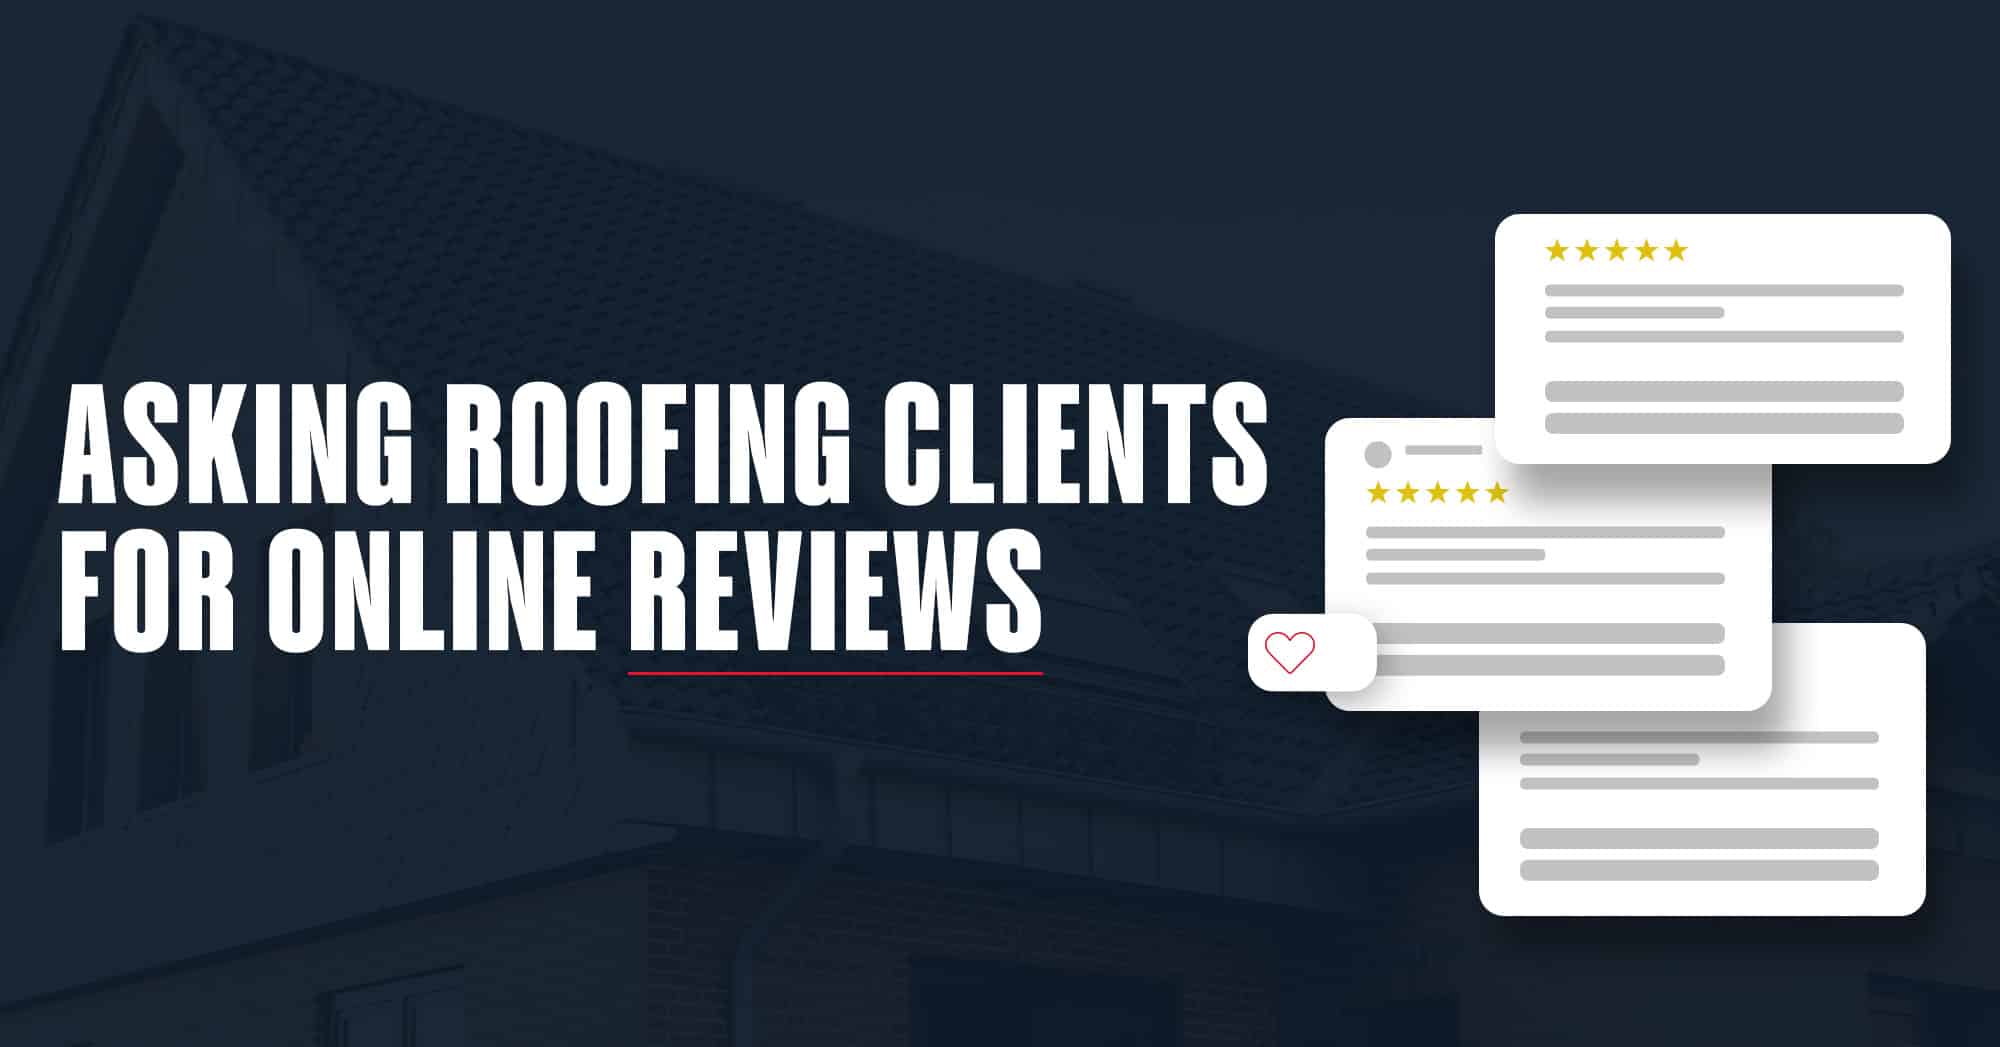 Roofing Clients for Online Reviews blog image